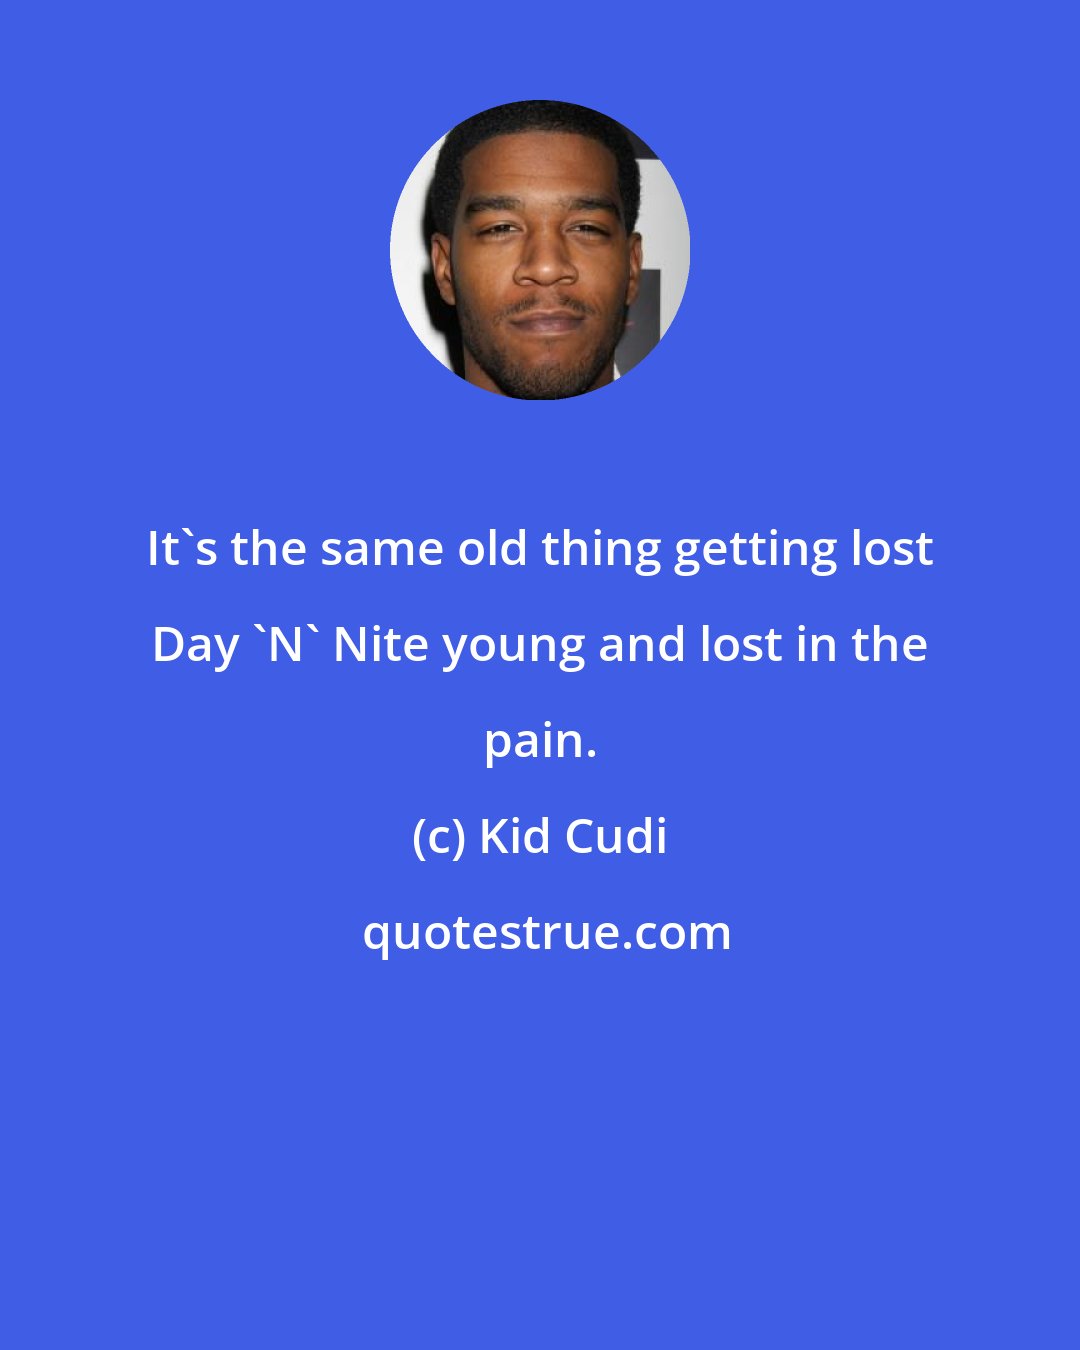 Kid Cudi: It's the same old thing getting lost Day 'N' Nite young and lost in the pain.